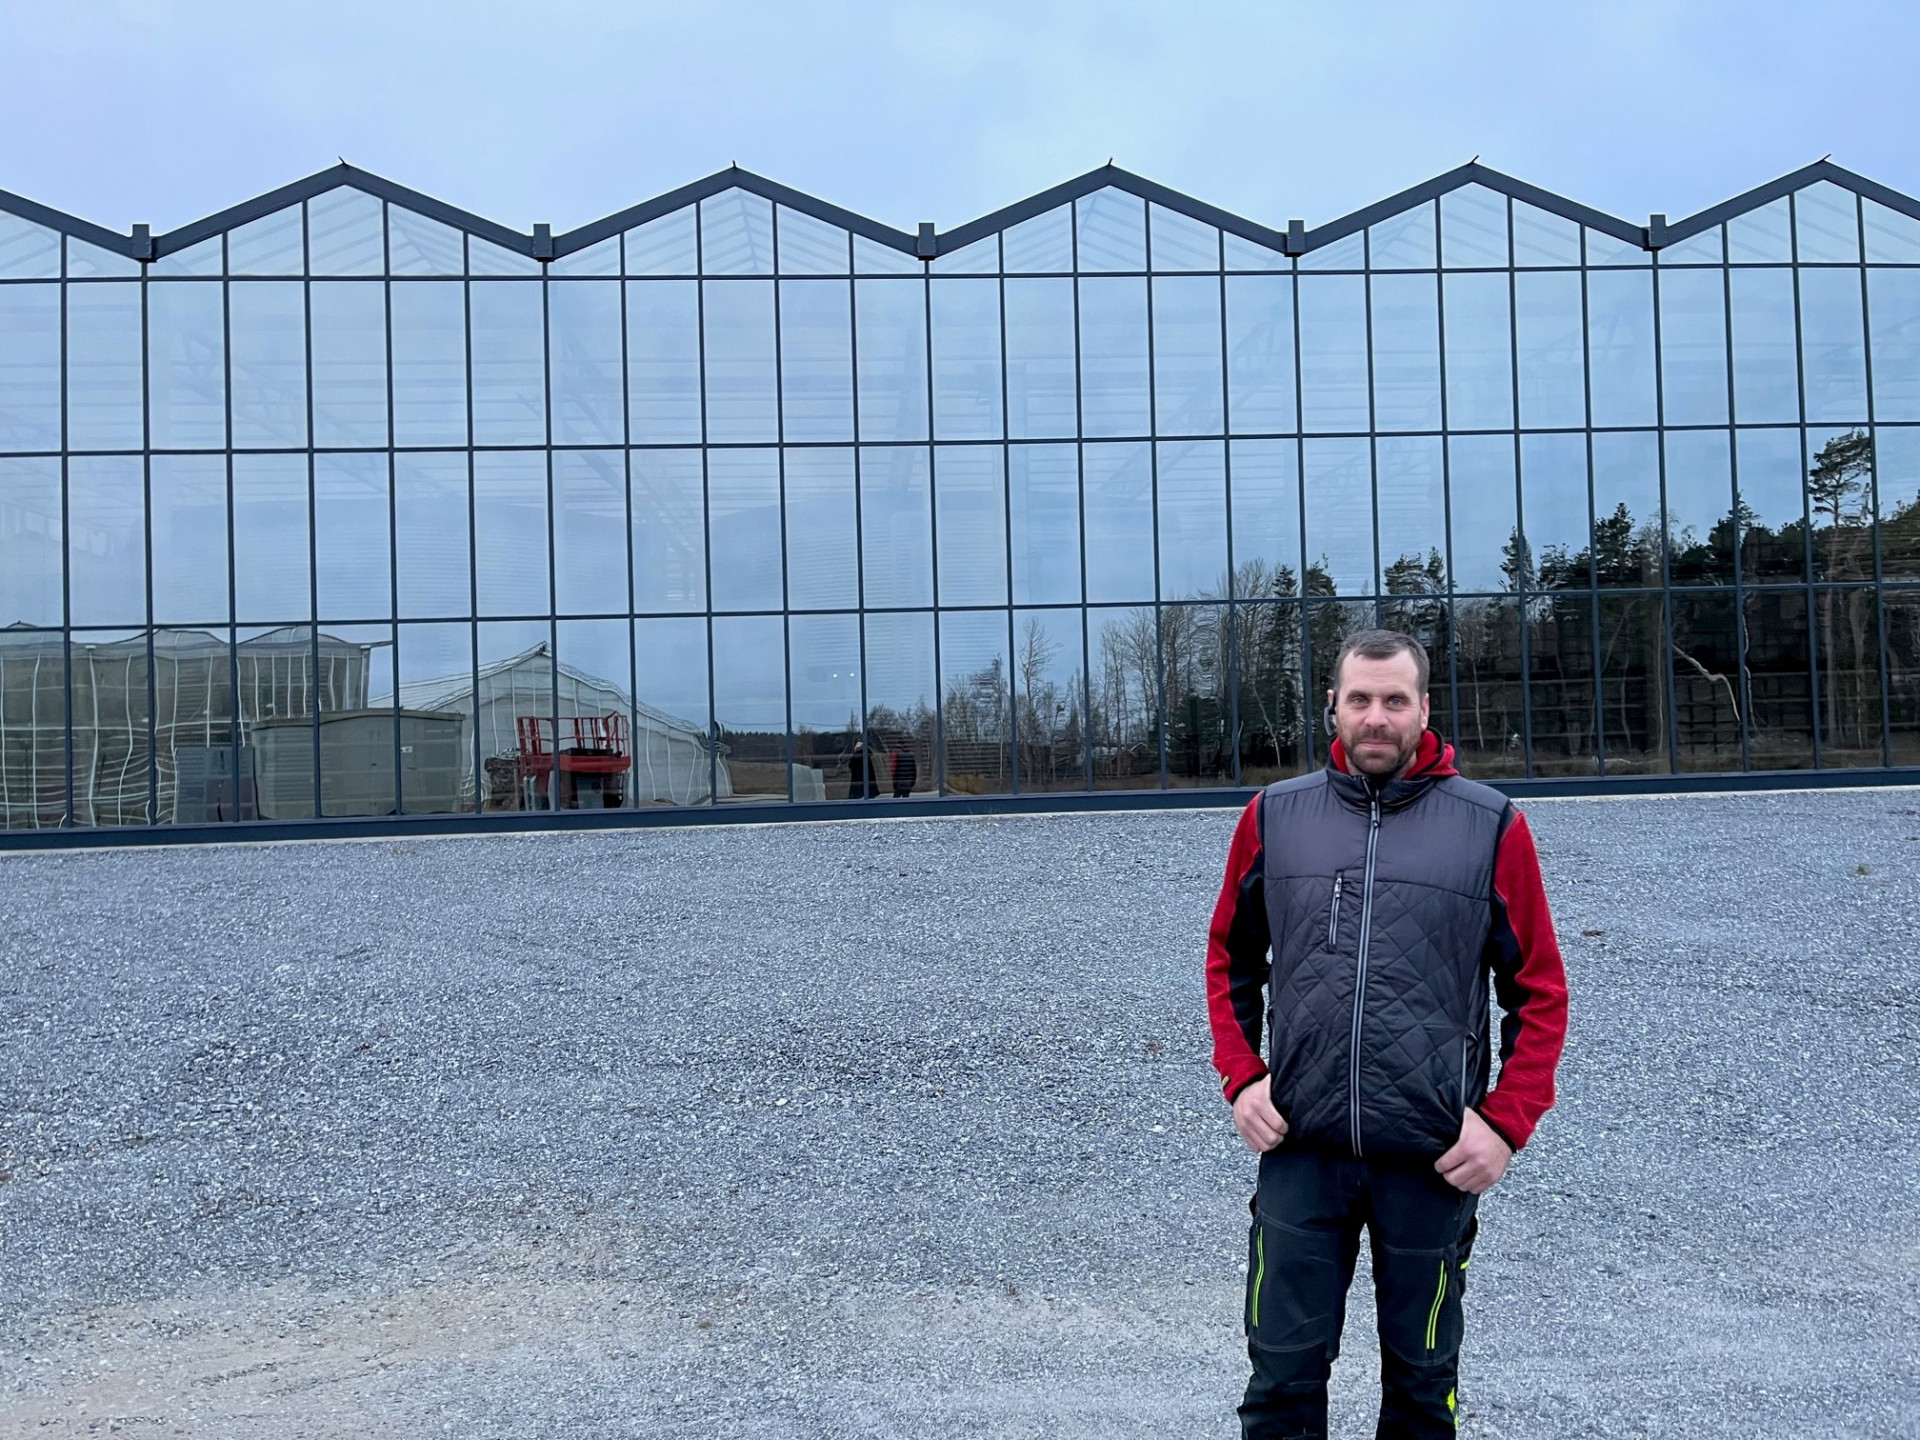 The largest Finnish tomato grower, Sven Sigg is improving yield and ROI (Return on Investment) with Food Autonomy fixtures